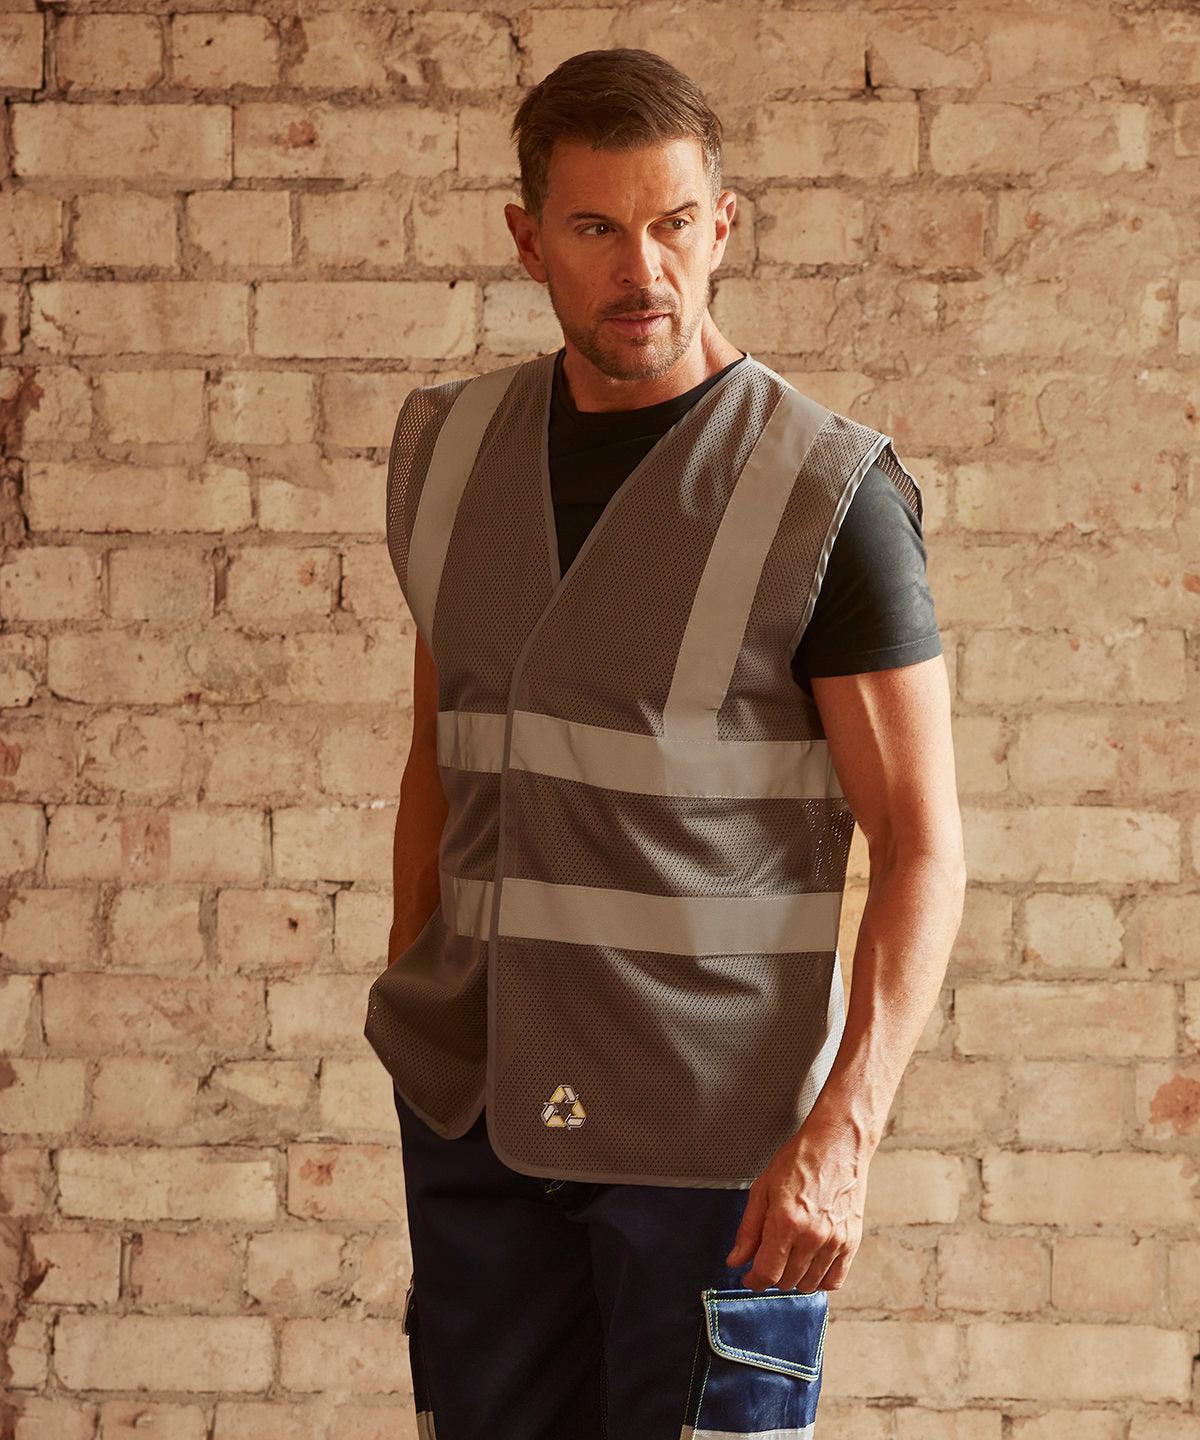 Black - Top cool open mesh 2-band-and-braces waistcoat (HVW120) Safety Vests Yoko Plus Sizes, Safety Essentials, Safetywear, Workwear Schoolwear Centres